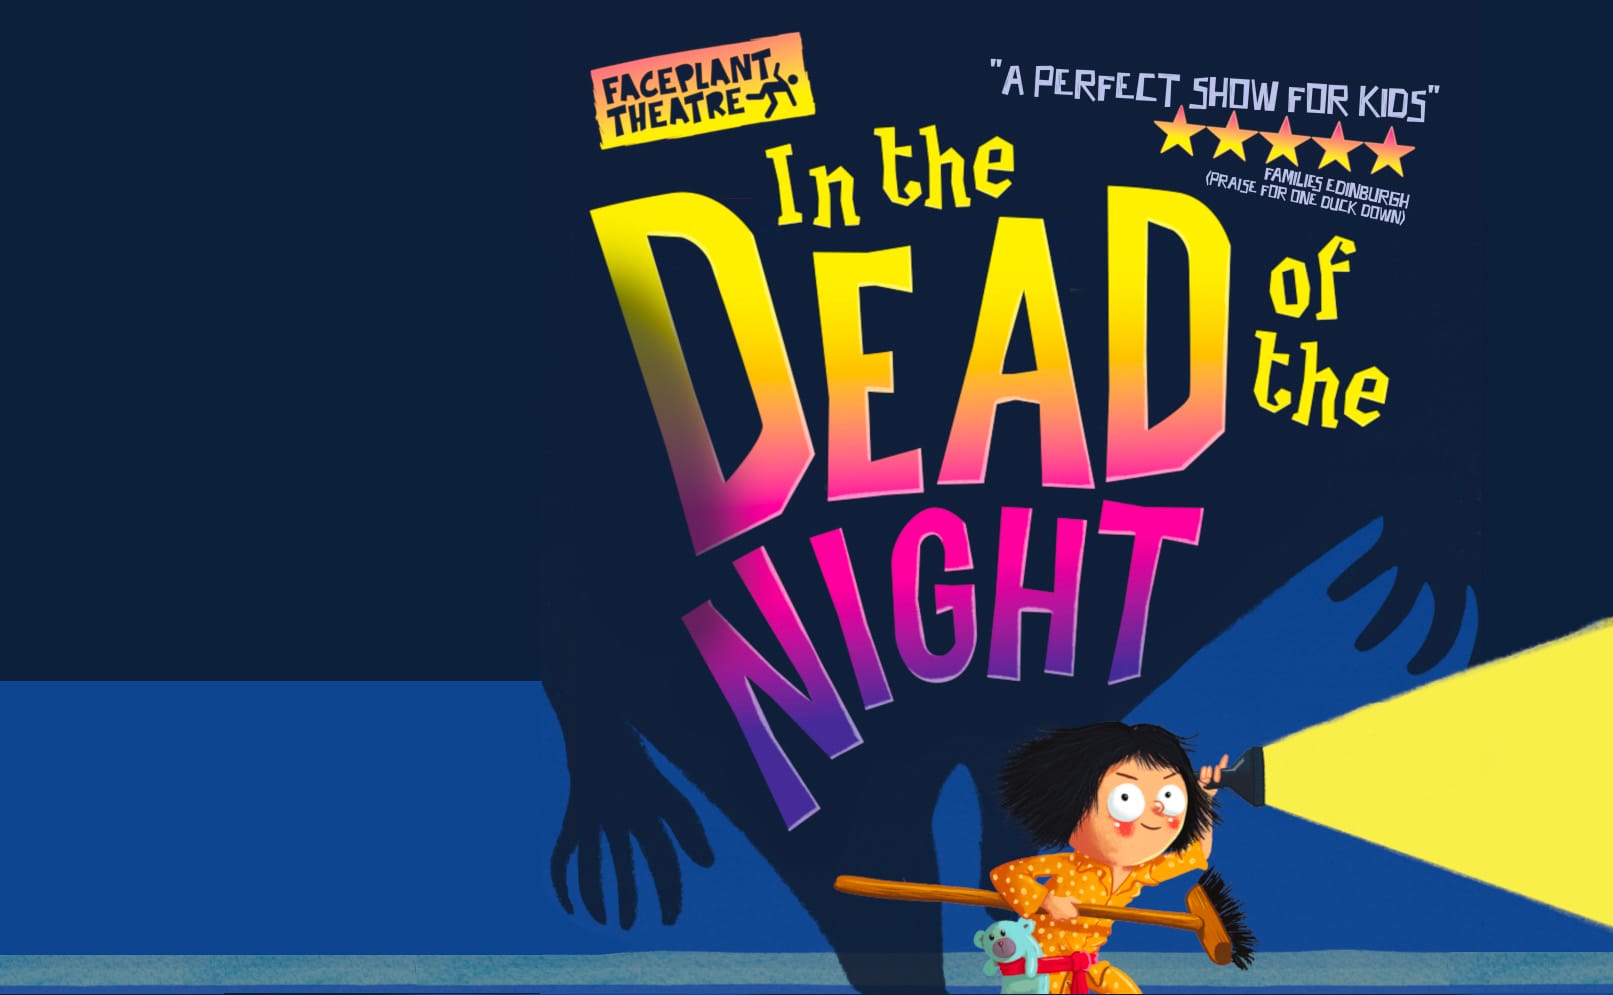 Artwork for In the Dead of the Night depicts a mischievous little girl with orange pyjamas, holding a broom and a torch shining a bright yellow light. Behind her lurks a mysterious shadow.